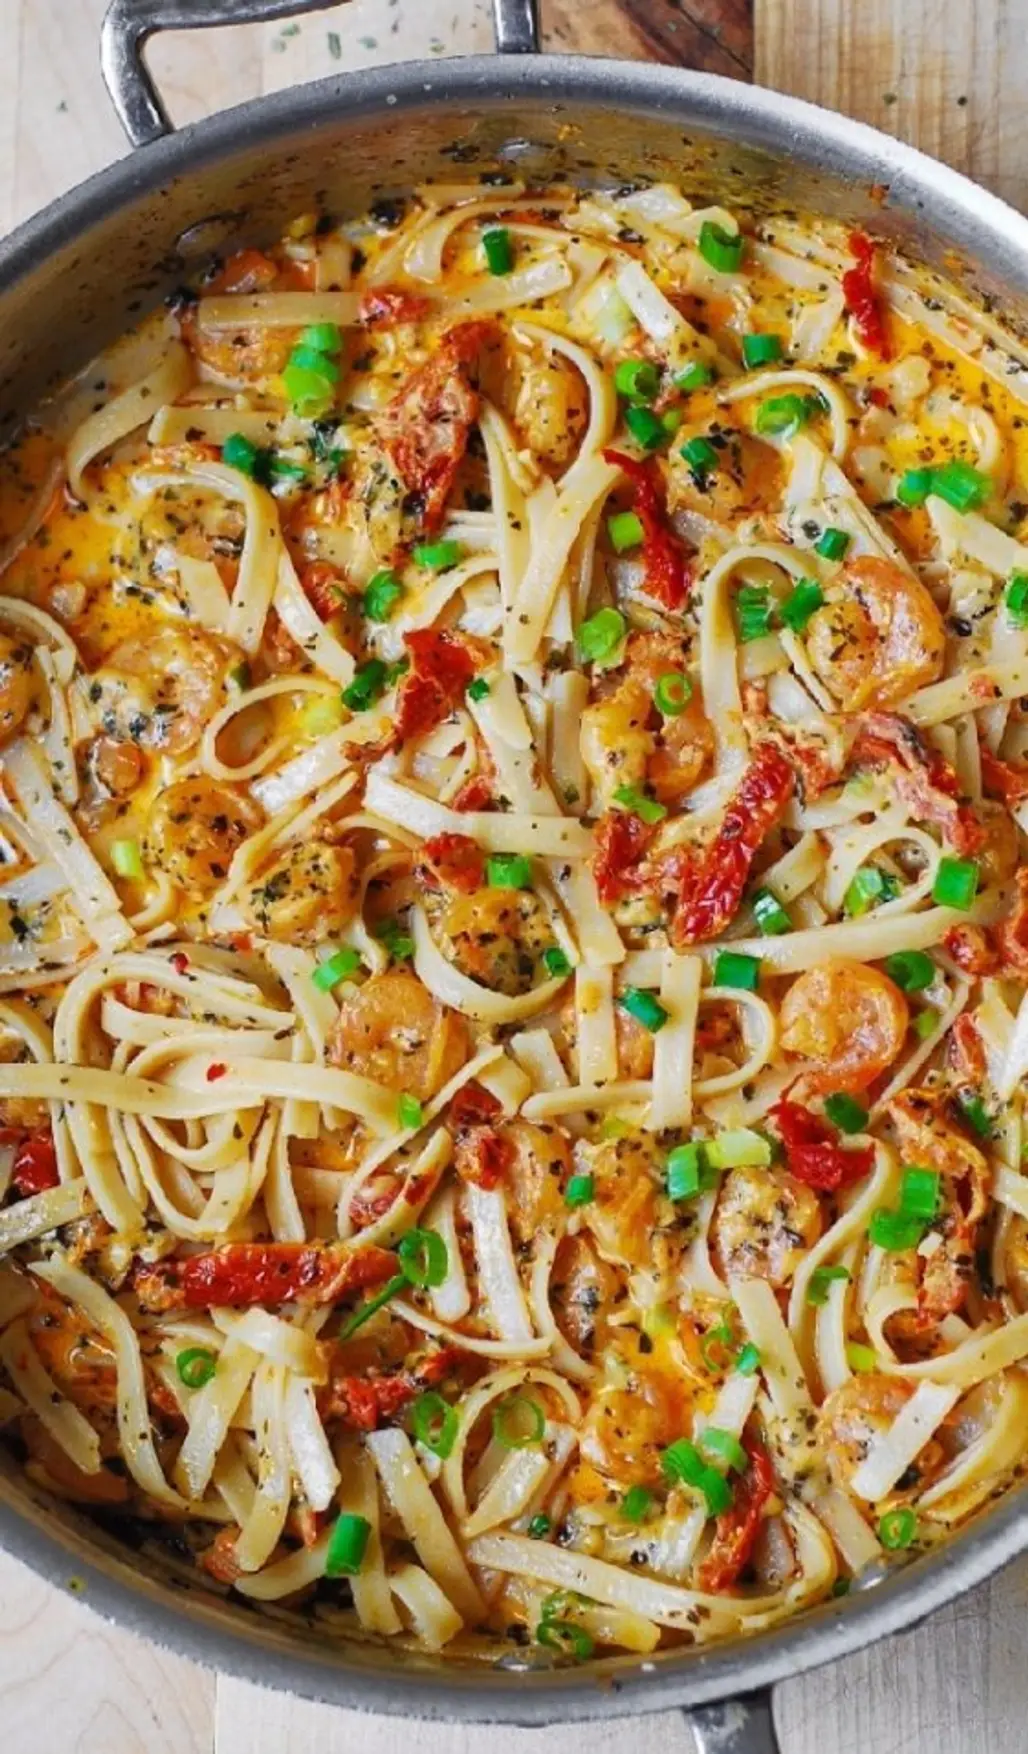 Garlic Shrimp and Sun-Dried Tomatoes with Pasta